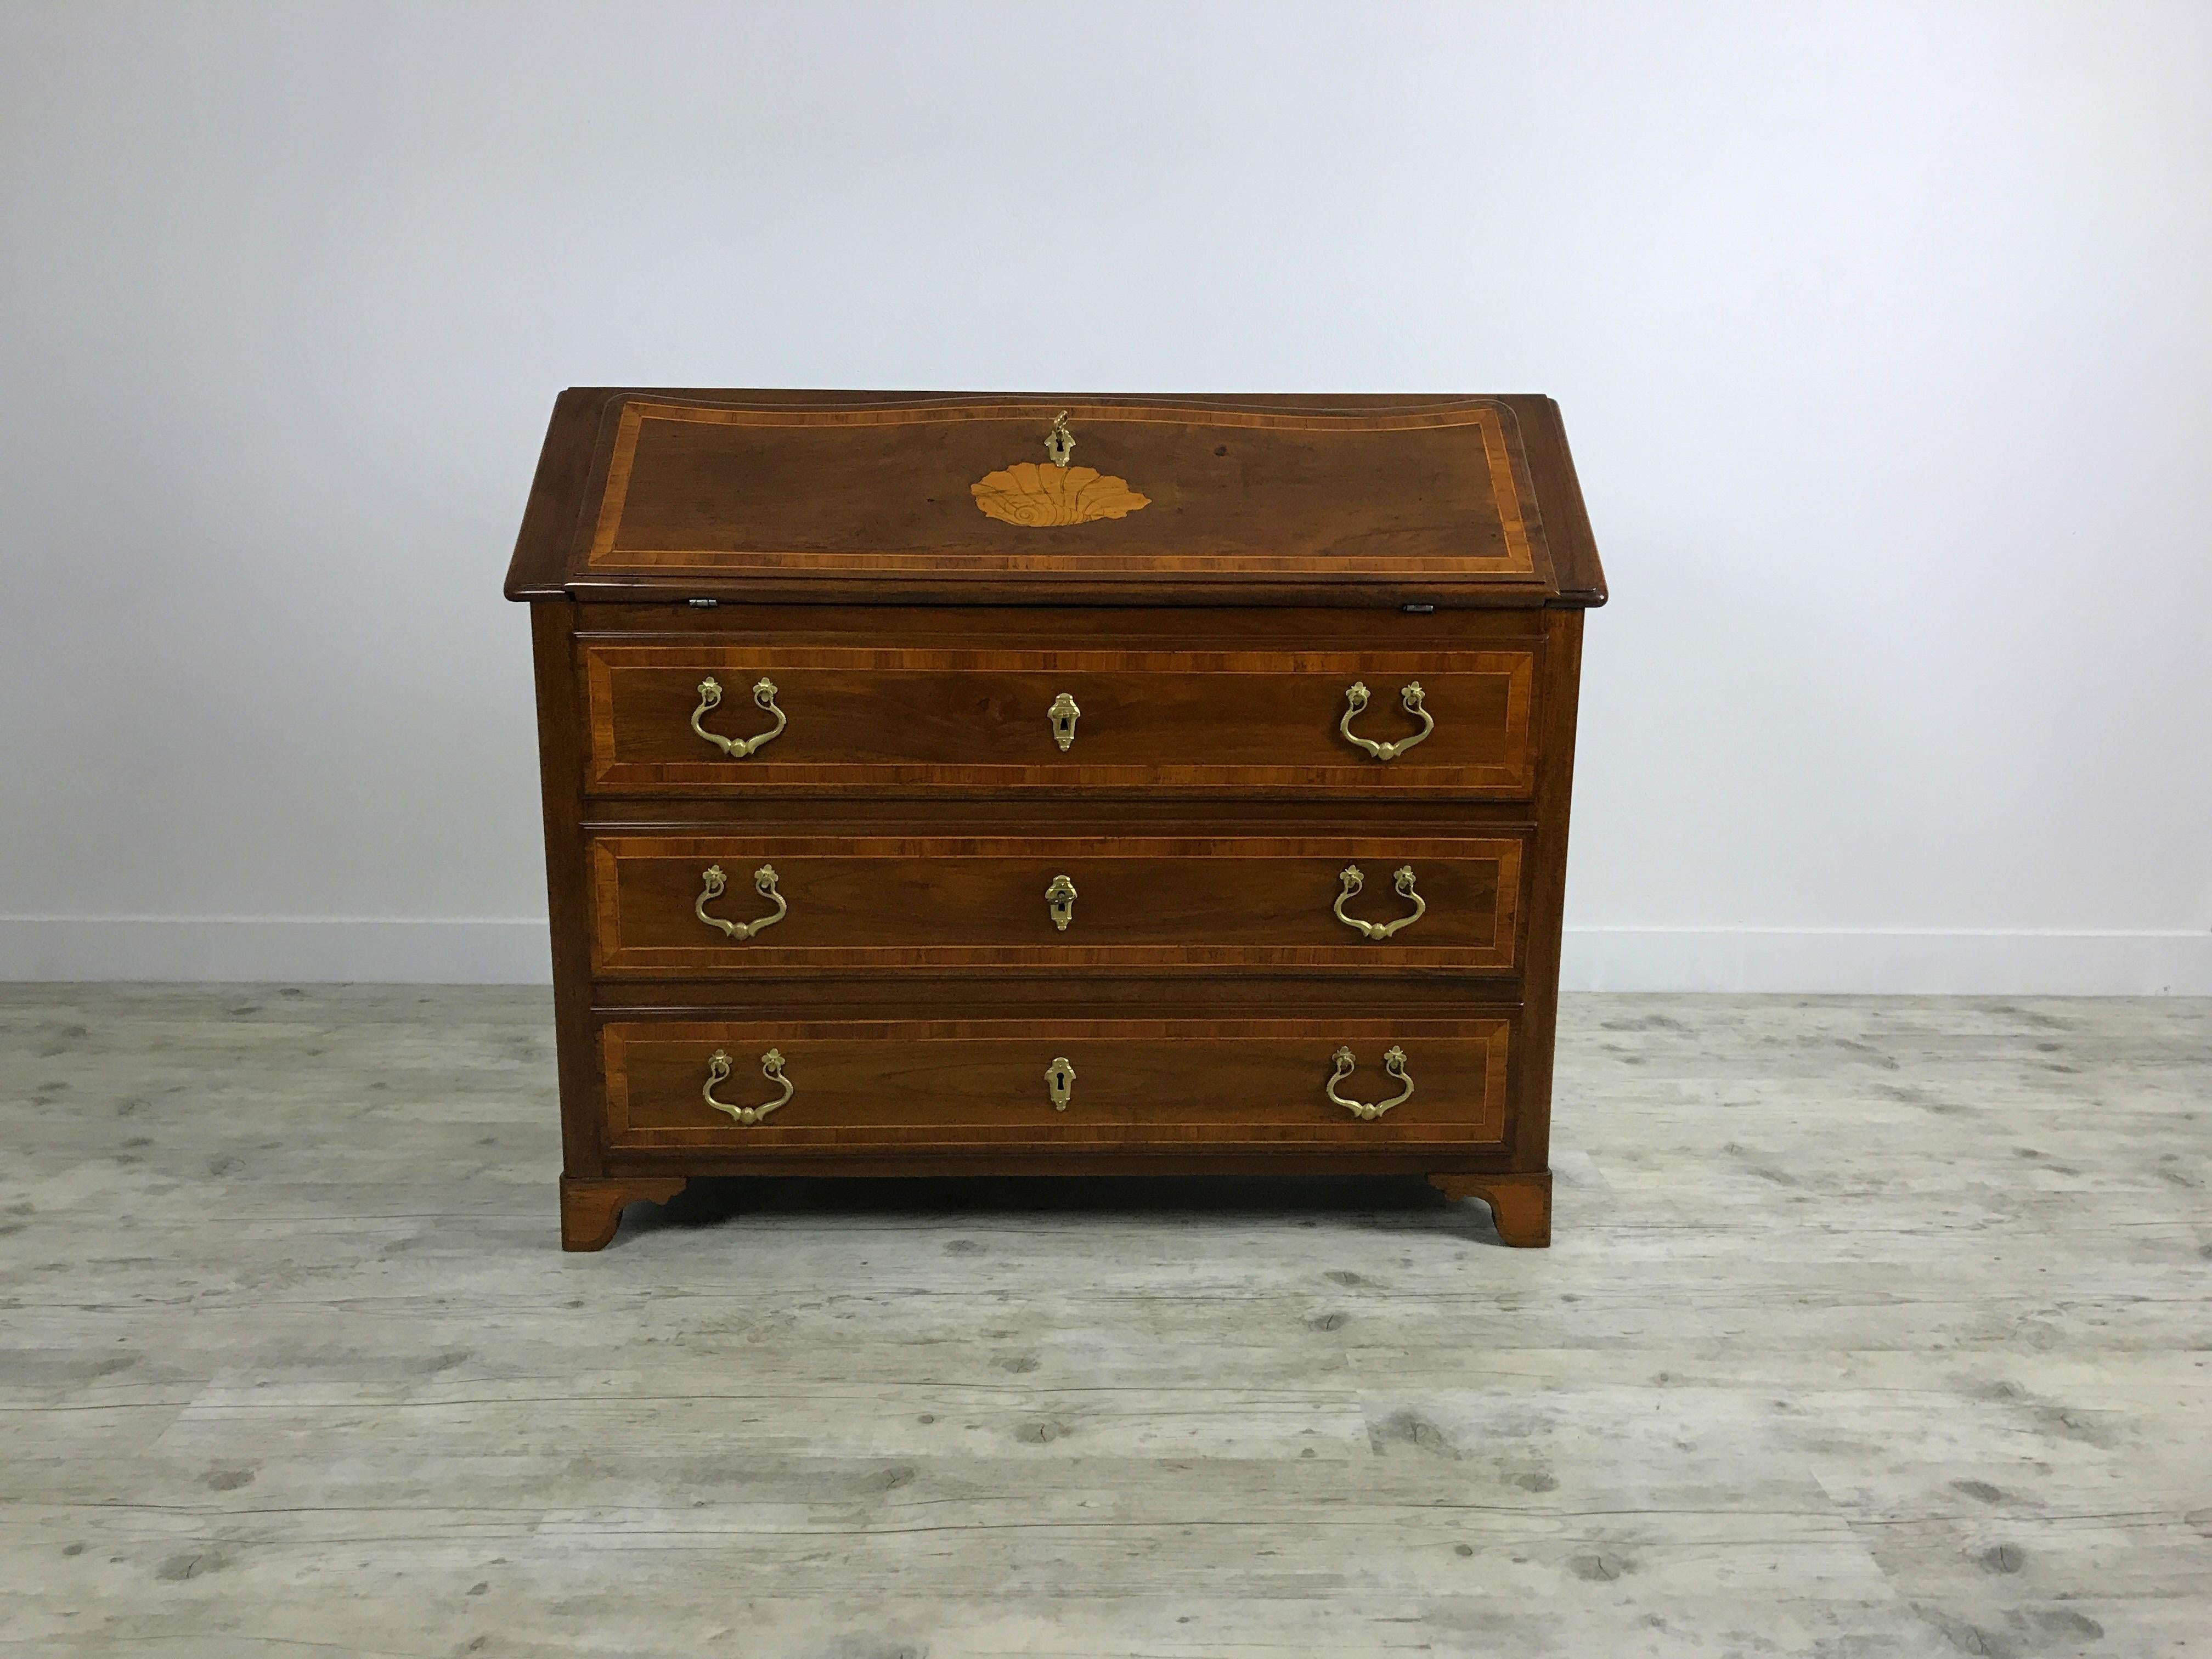 18th century, Italian inlaid and solid walnut wood chest of drawers with secretaire

This chest of drawers with secretaire was made in the north of Italy (Piedmont) around the middle of the 18th century. The cabinet is made of solid walnut wood